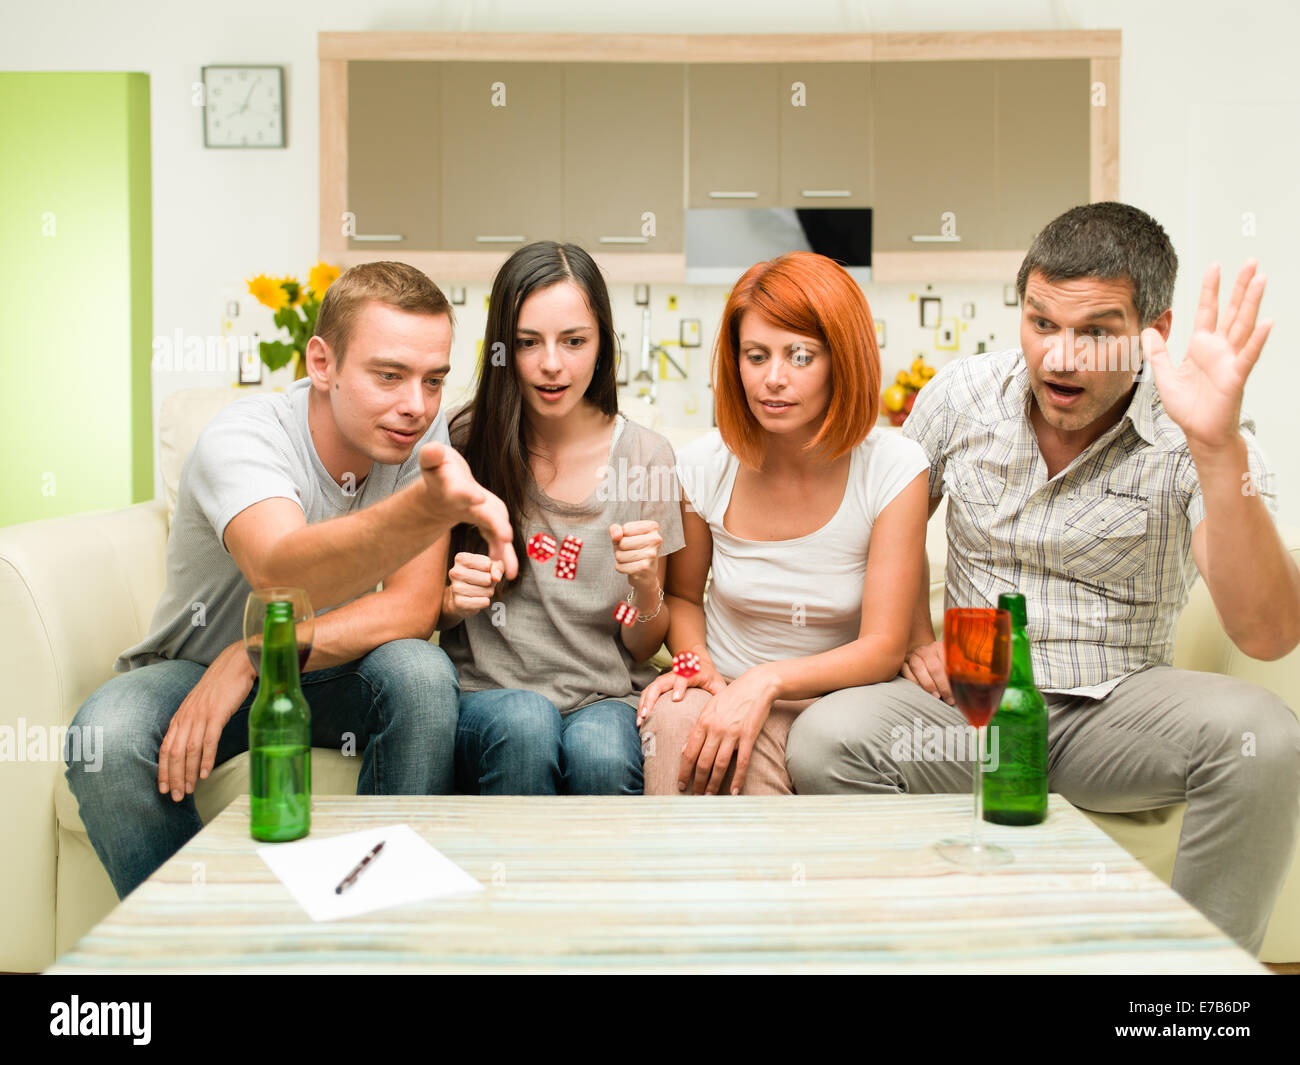 friends sitting on sofa, playing game with dices and having fun Stock Photo